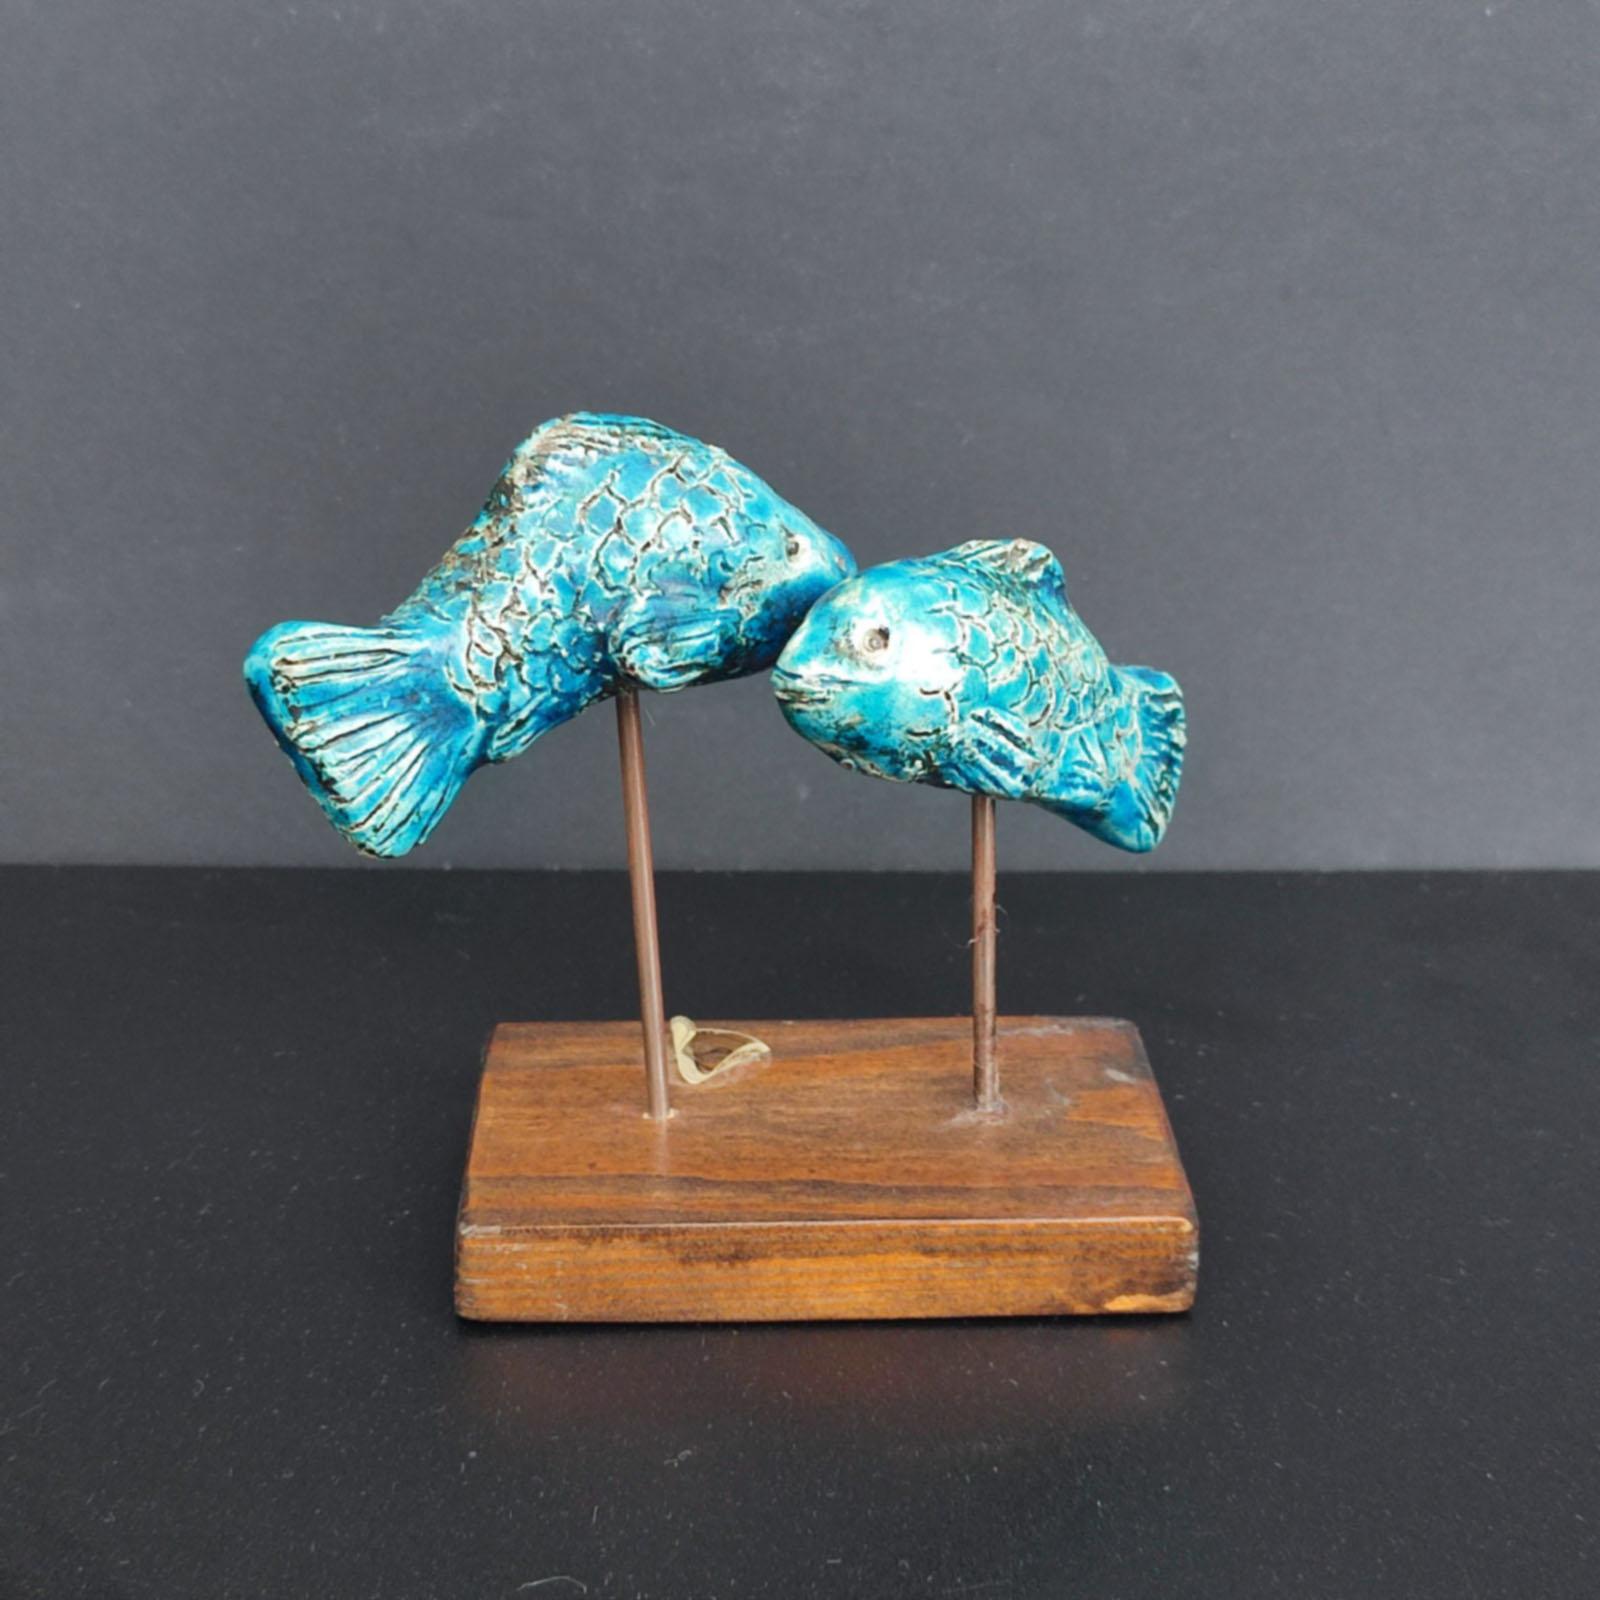 Beautiful ceramic sculpture of two fishes with a great blue glaze. An eye-catcher wherever it gets its place. Designed, modeled, fired and glazed with high-quality colors. Mounted on a wooden base. A unique piece! Original label on the